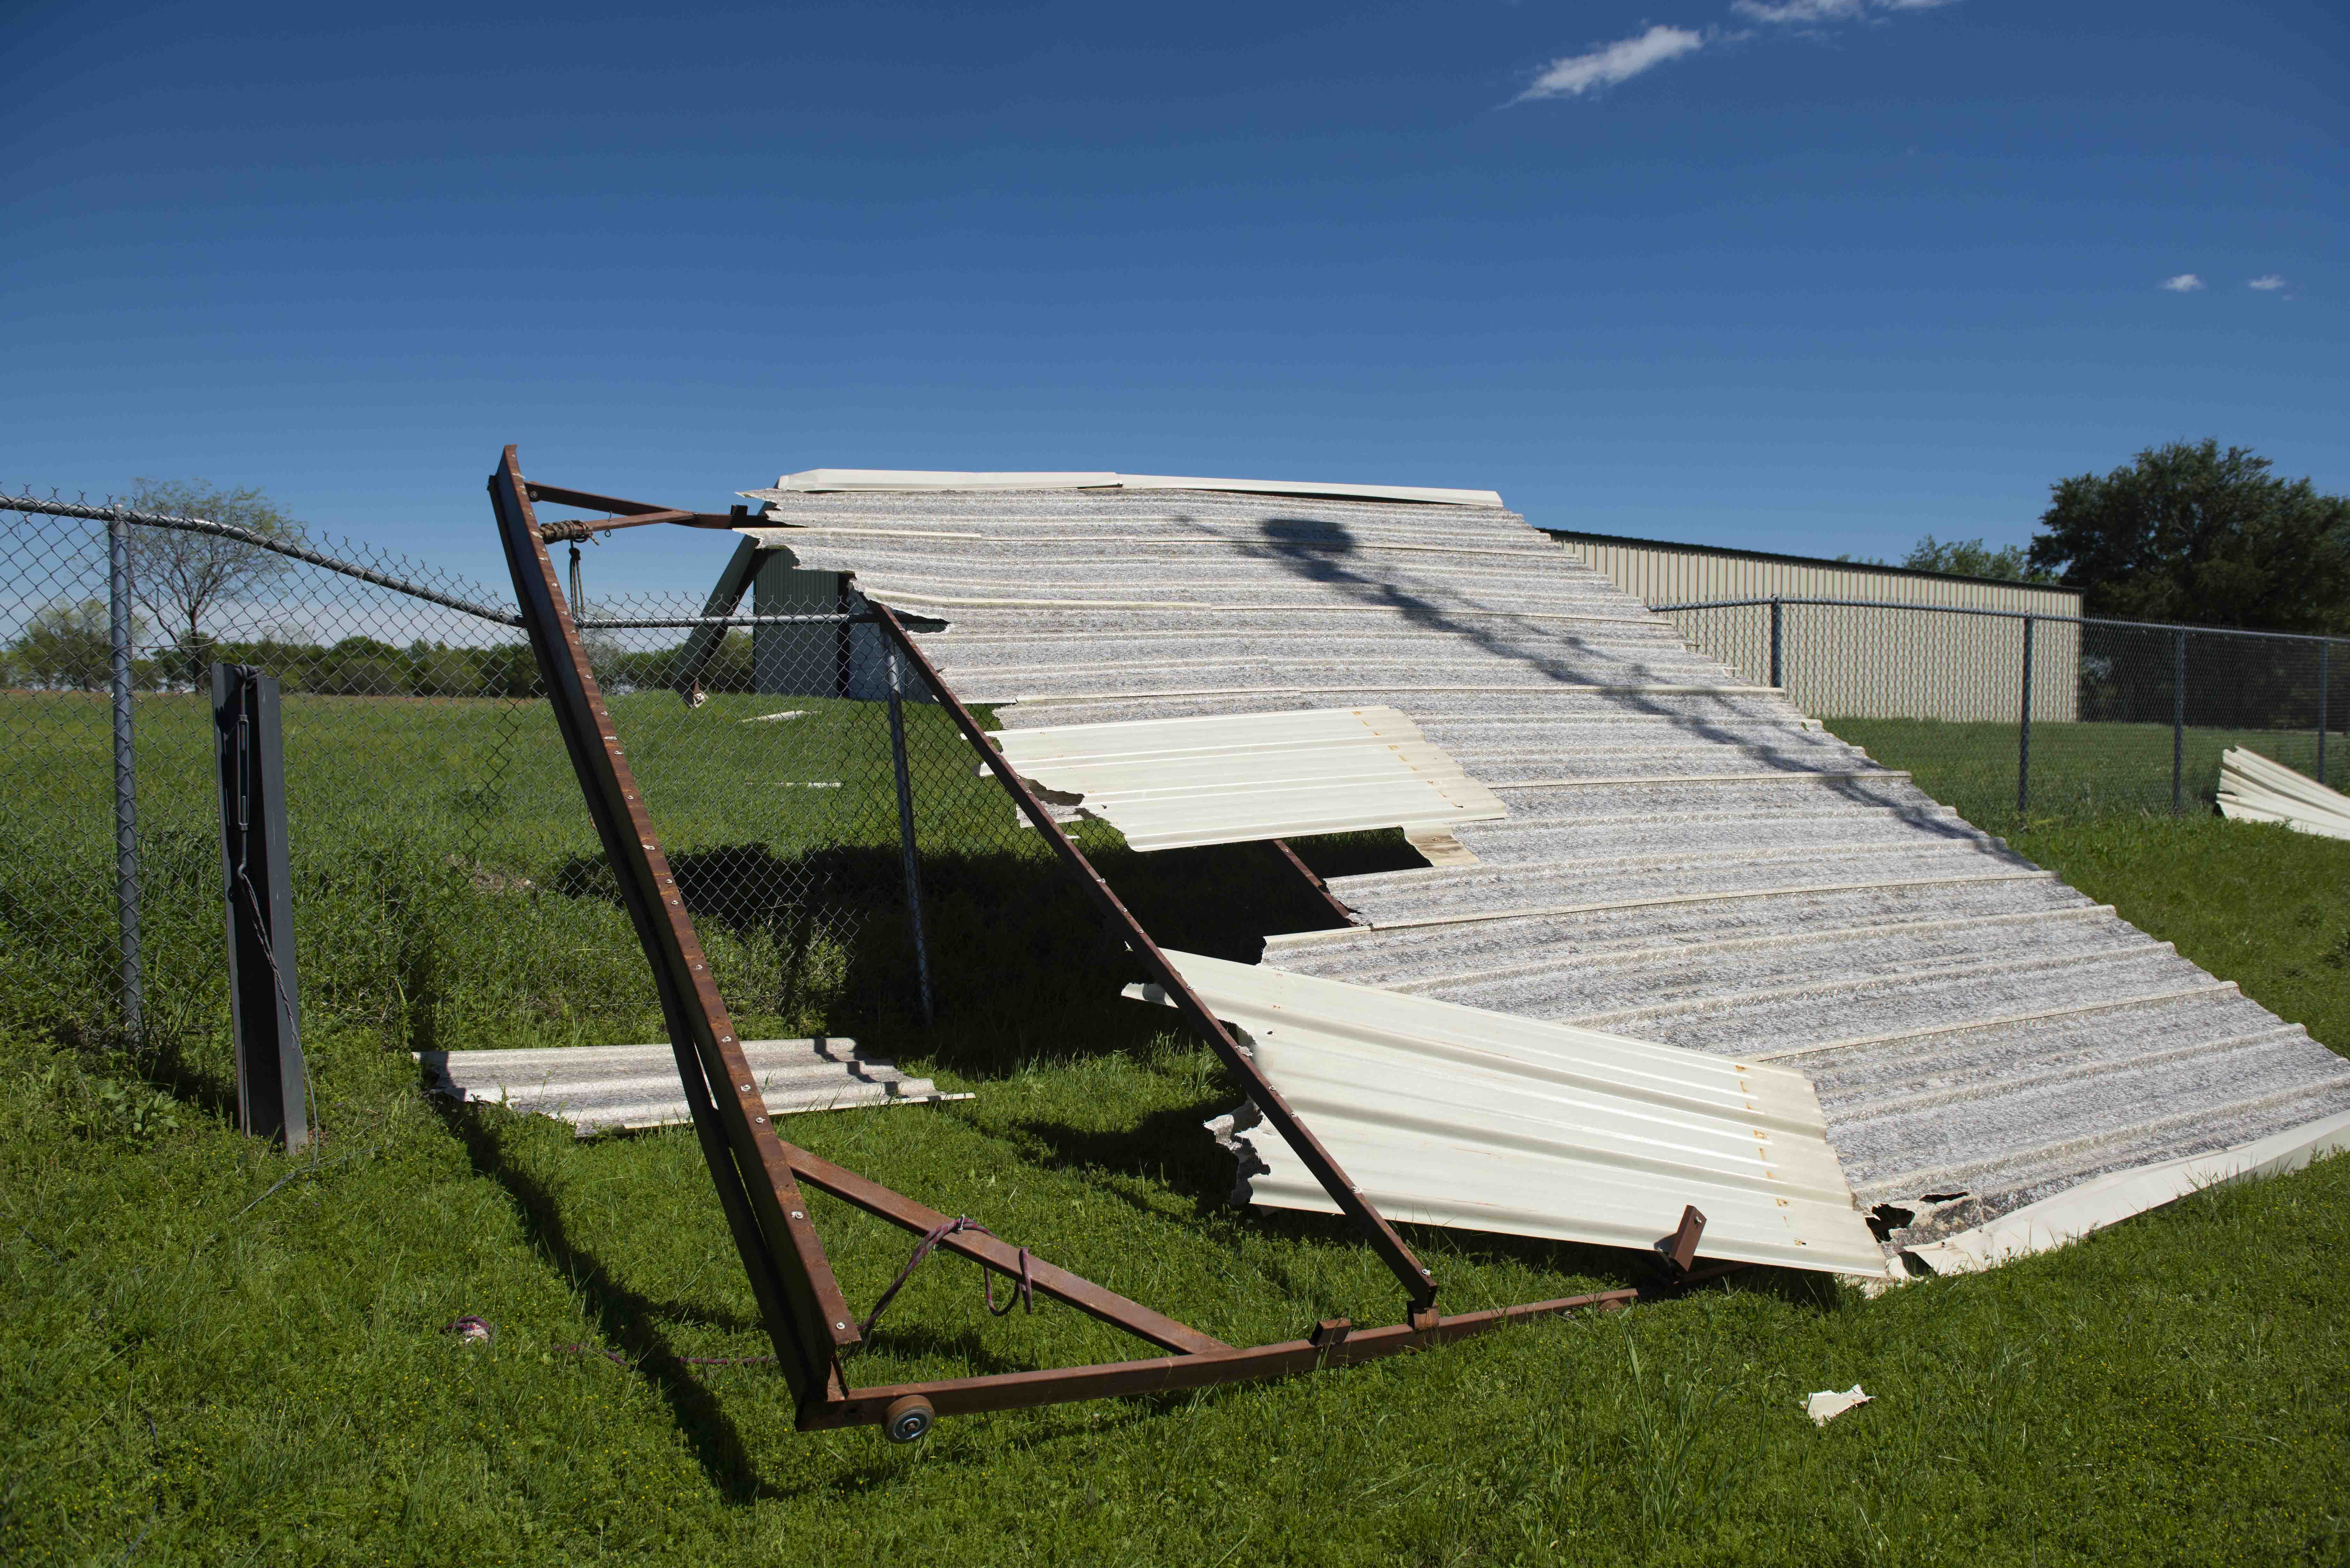 Severe storms rip roofs off of UNT’s Rafes Observatory buildings